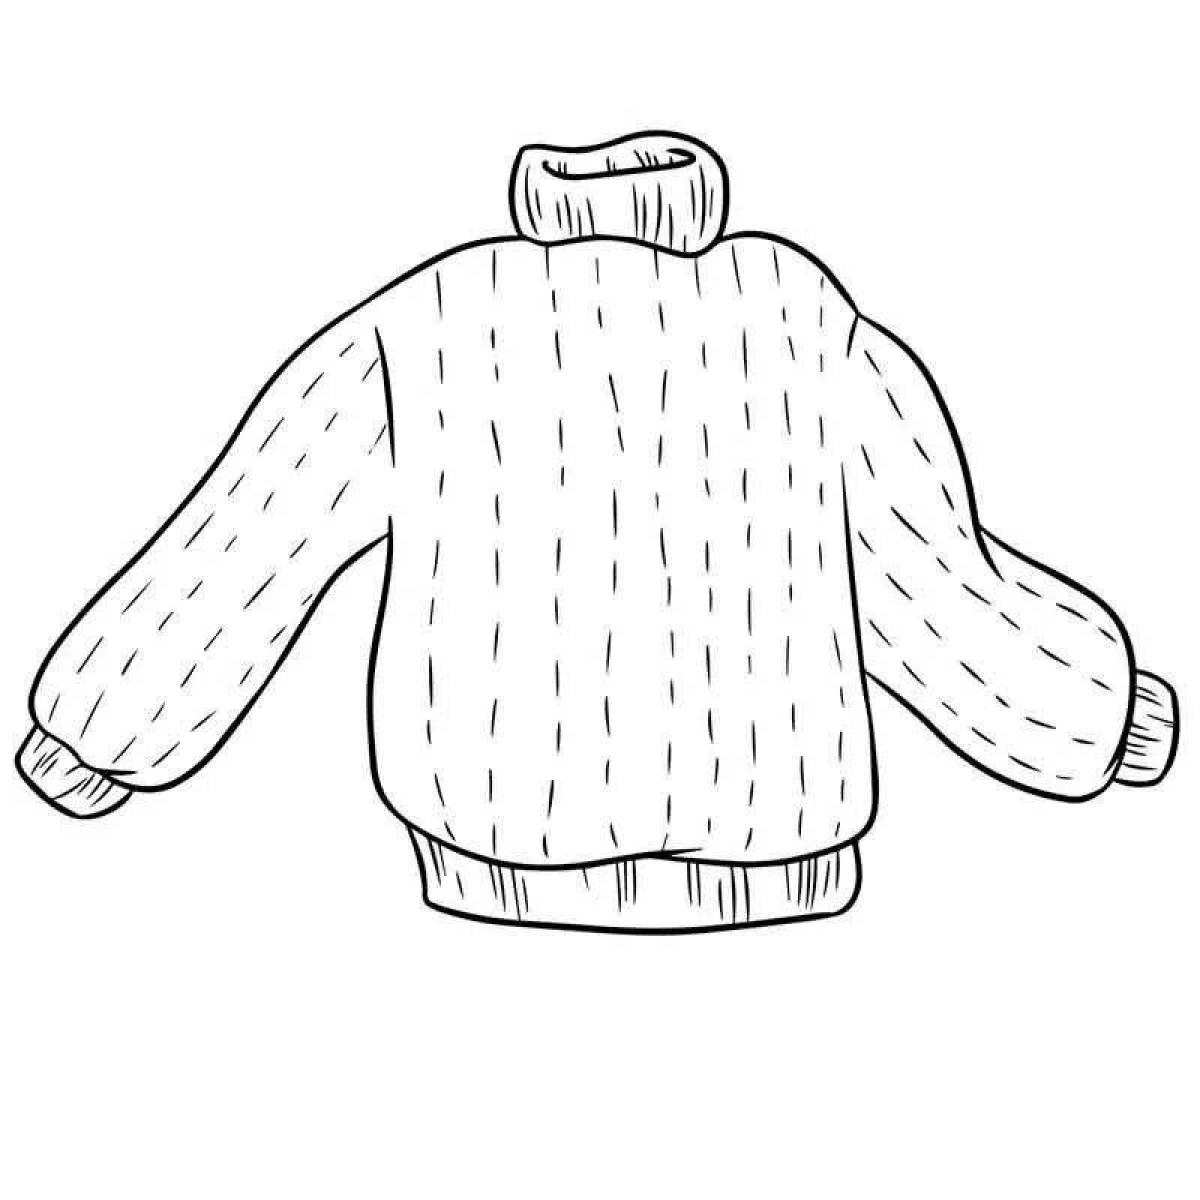 Coloring page dazzling sweater for children 4-5 years old